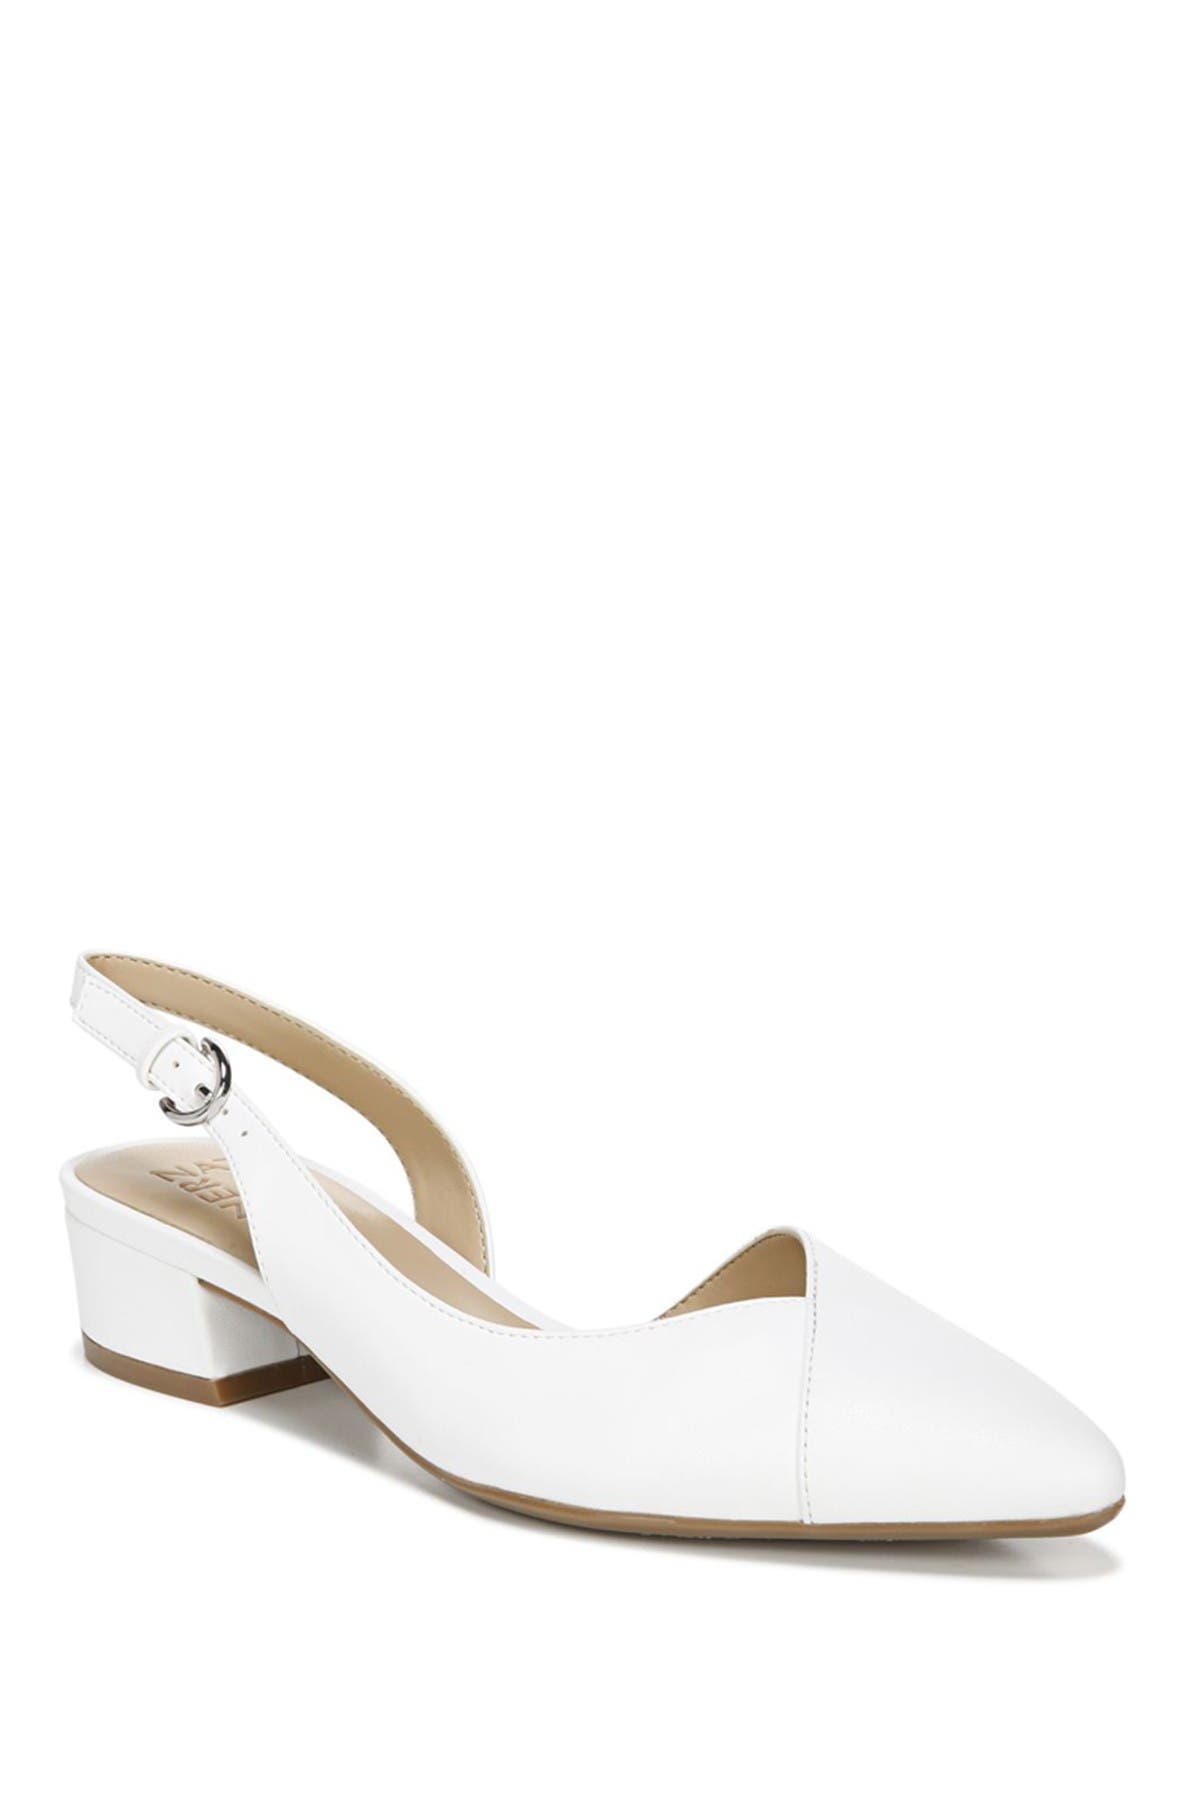 Naturalizer | Frisco Pointed Toe Block 